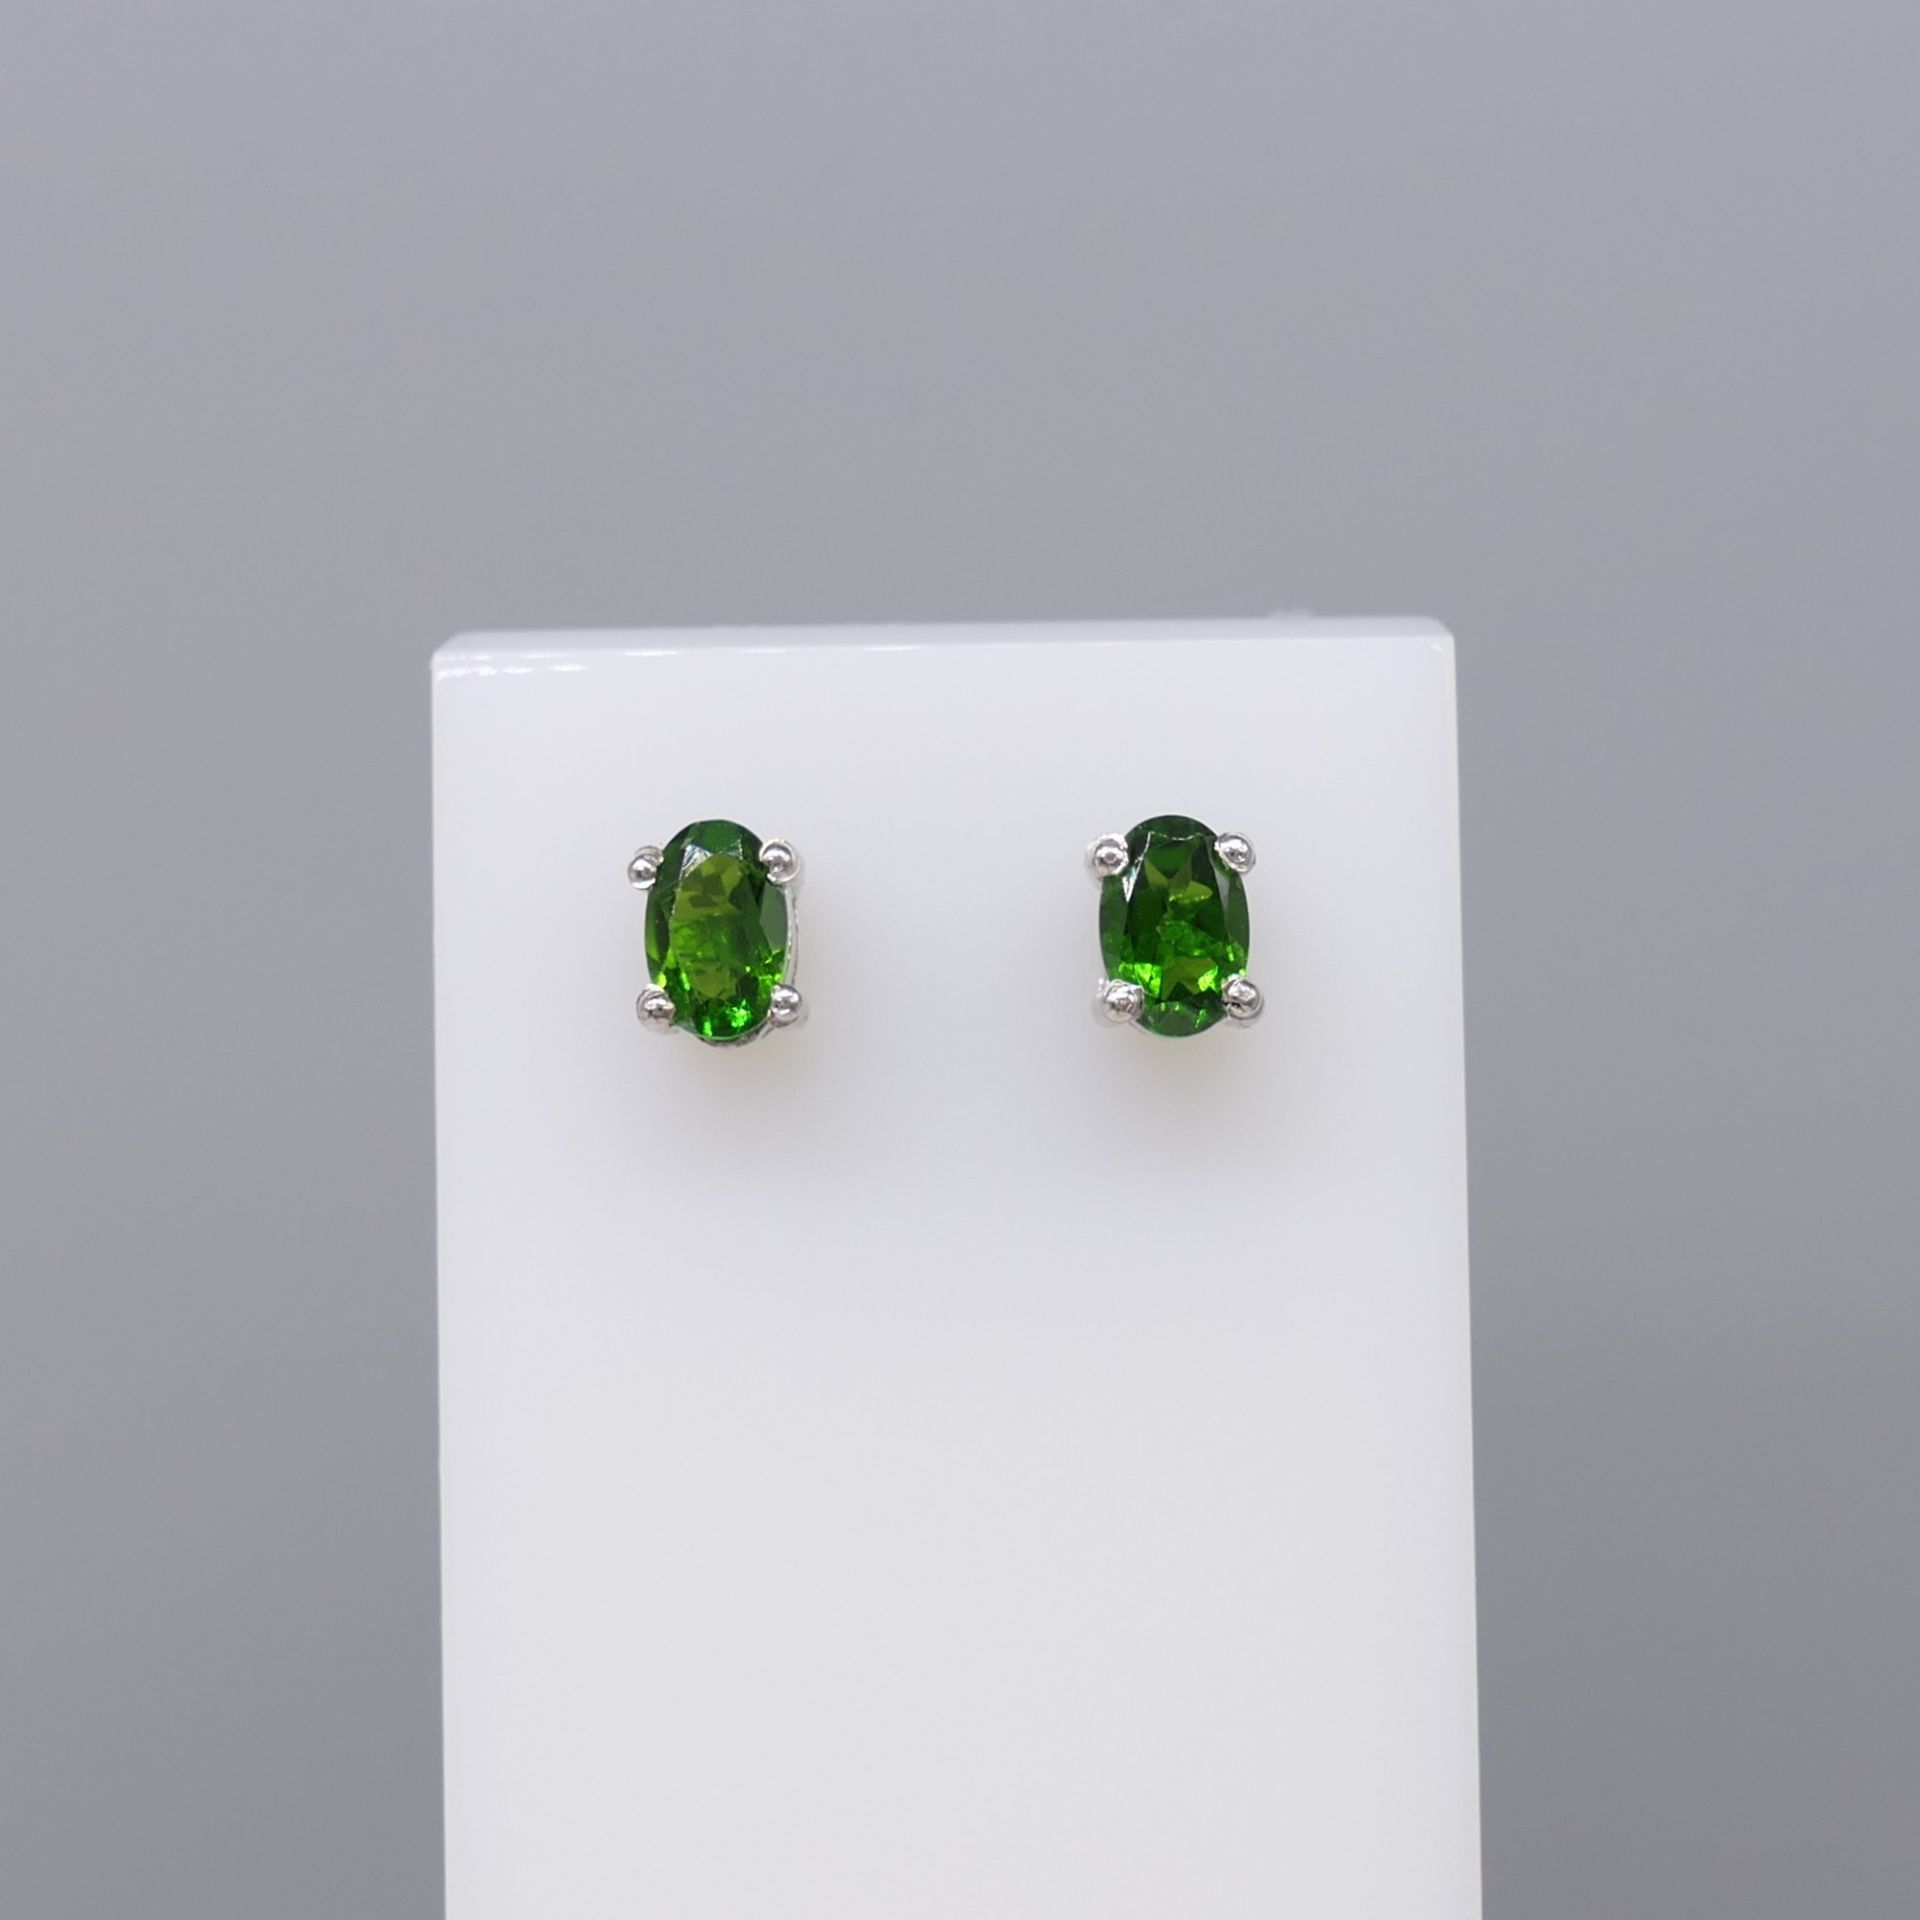 Pair Of Natural Chrome Diopside Ear Studs In Sterl - Image 6 of 7